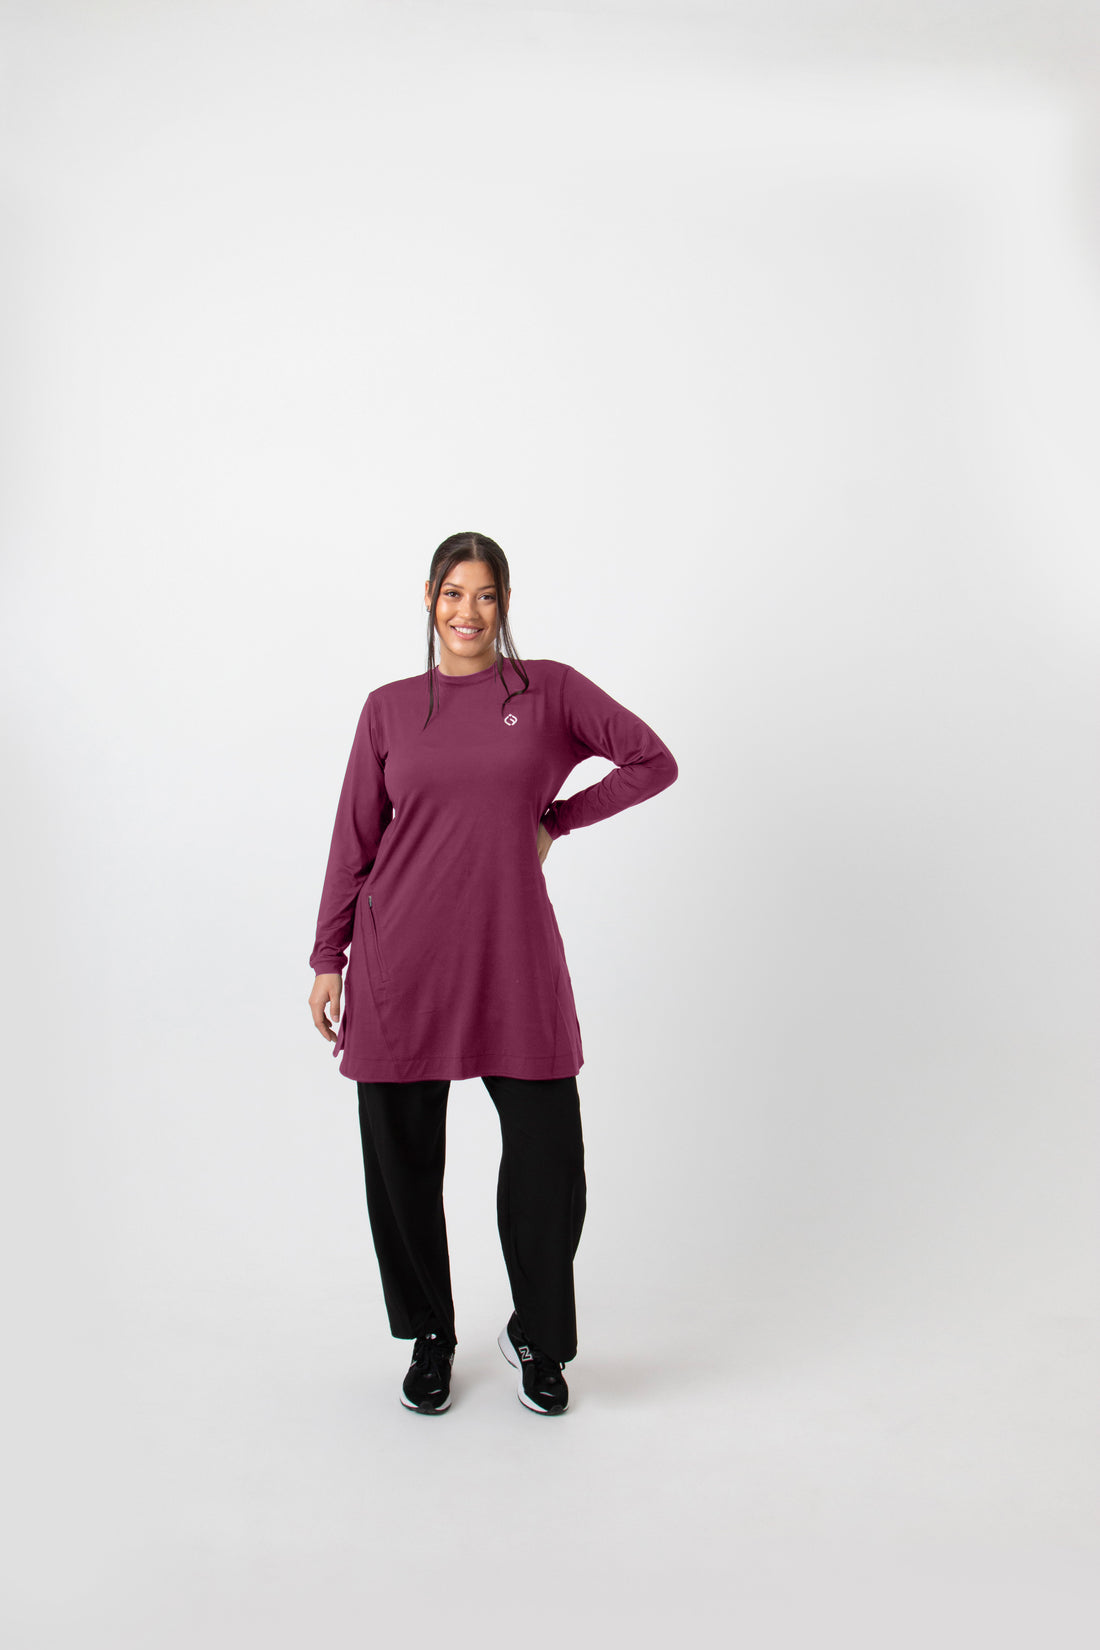 Performance Top - Dignitii, Best Modest Sportswear Tops, Long Sleeves  Loose Workout top, Modest Islamic Activewear